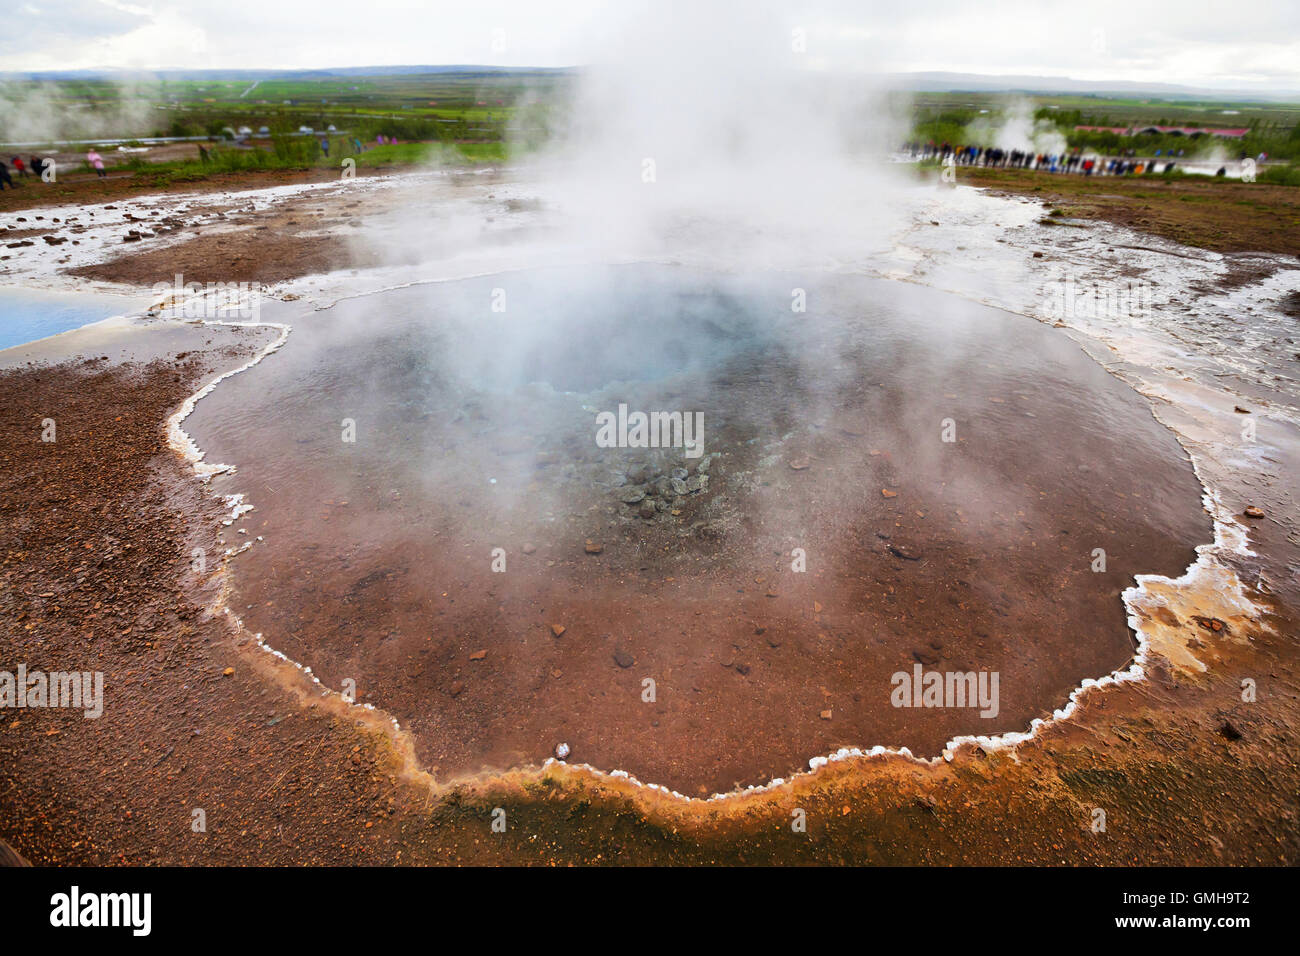 Mineral hot spring Blesi in Haukadalur geyser valley, Iceland Stock Photo